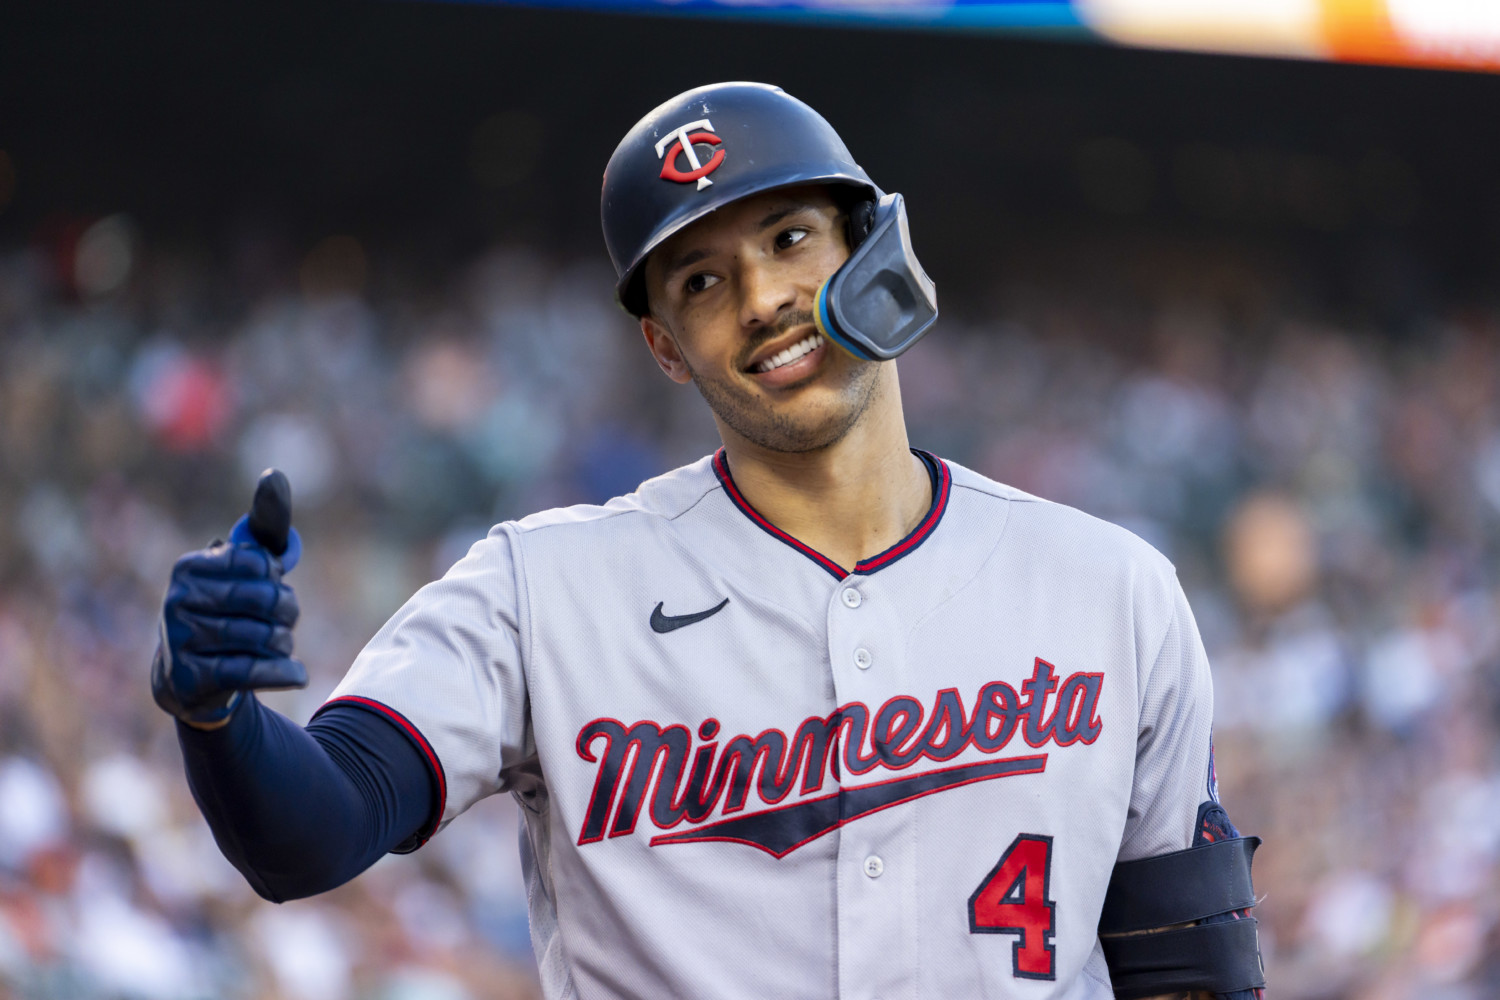 Minnesota Twins shortstop Carlos Correa shows a thumbs-up to bench